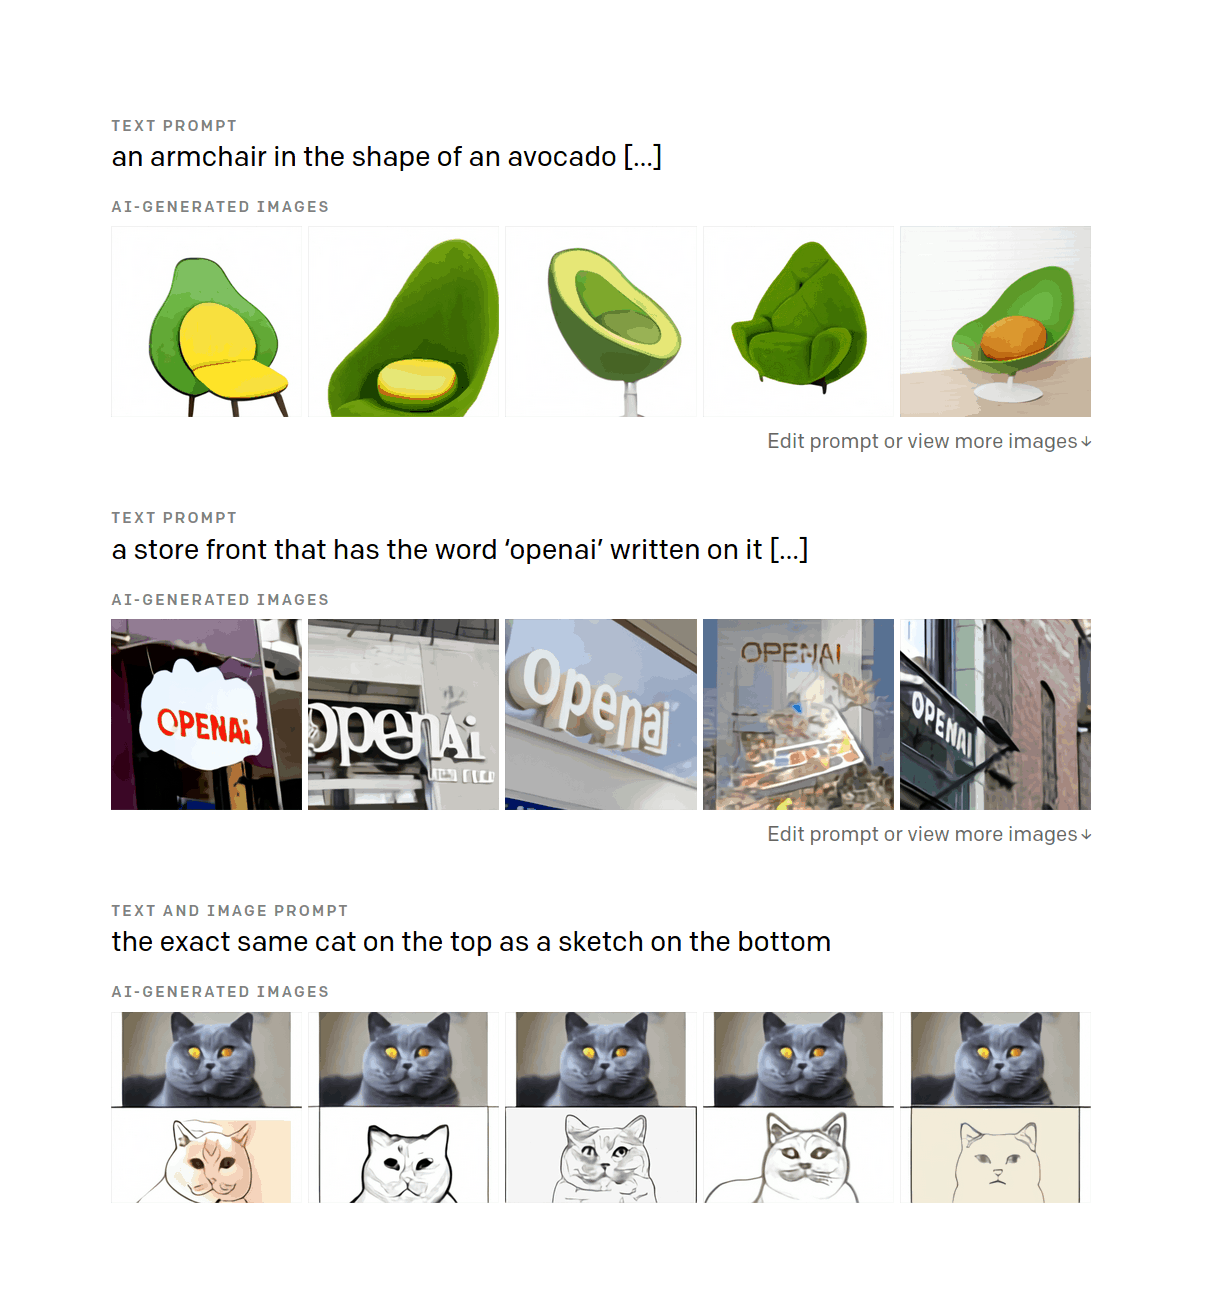 [3 DALL·E prompts: “an armchair in the shape of an avocado…” · “a store front that has the word ‘openai’ written on it…” · “the exact same cat on the top as a sketch on the bottom”]